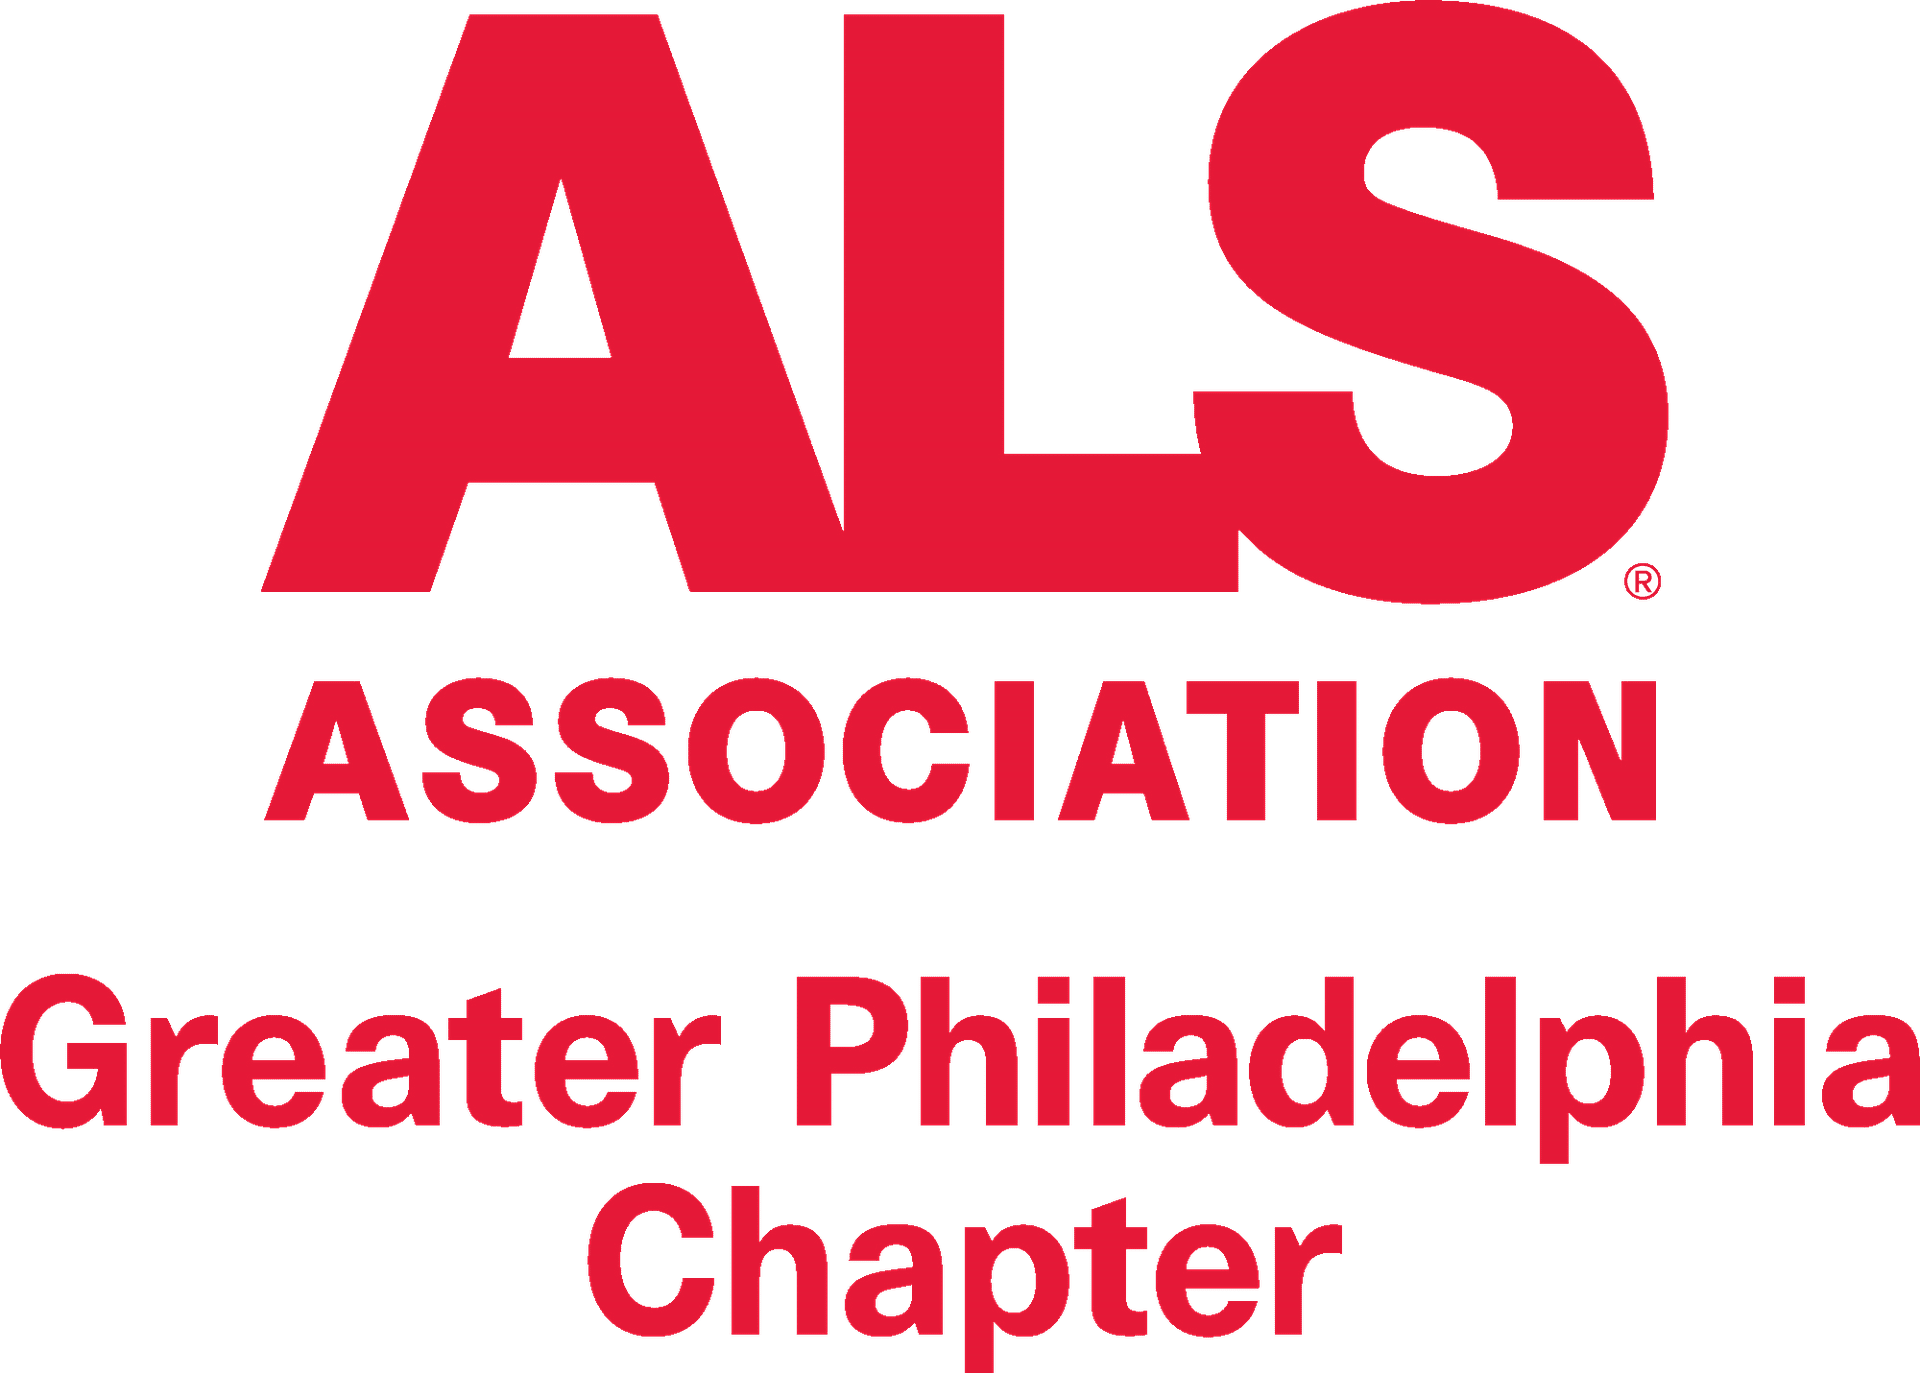 The ALS Association Greater Philadelphia Chapter